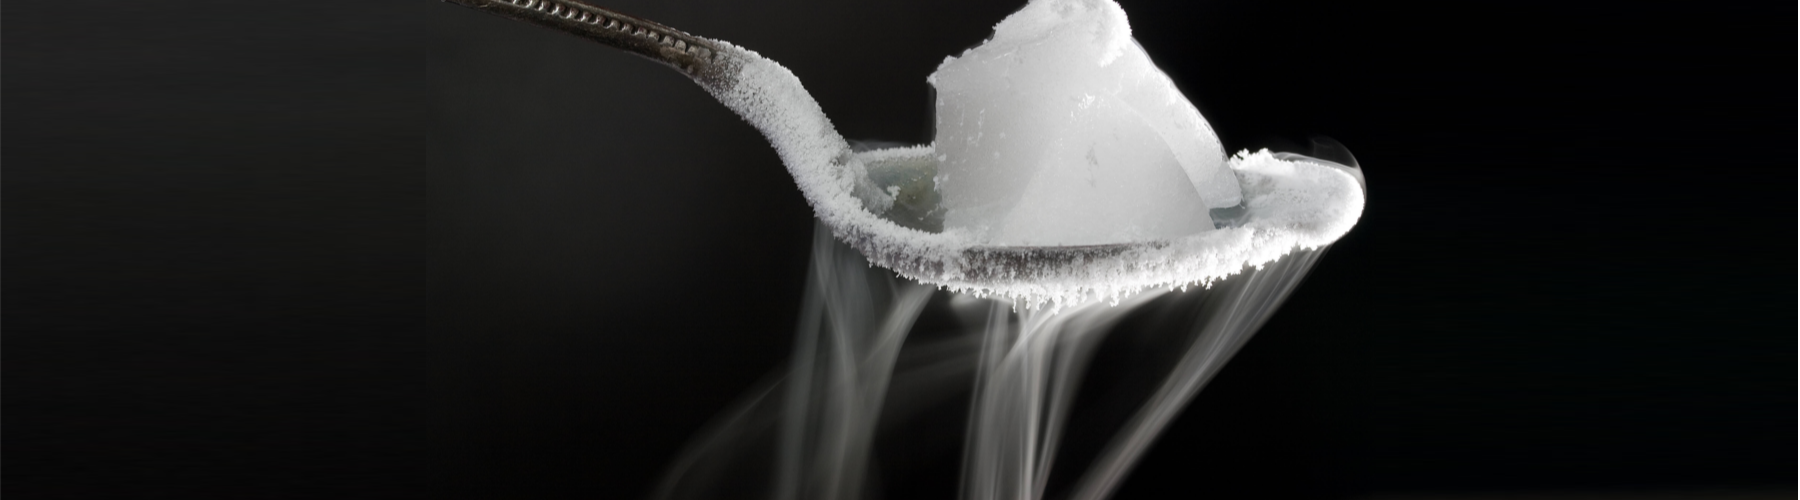 Dryice (Carbon Dioxide)